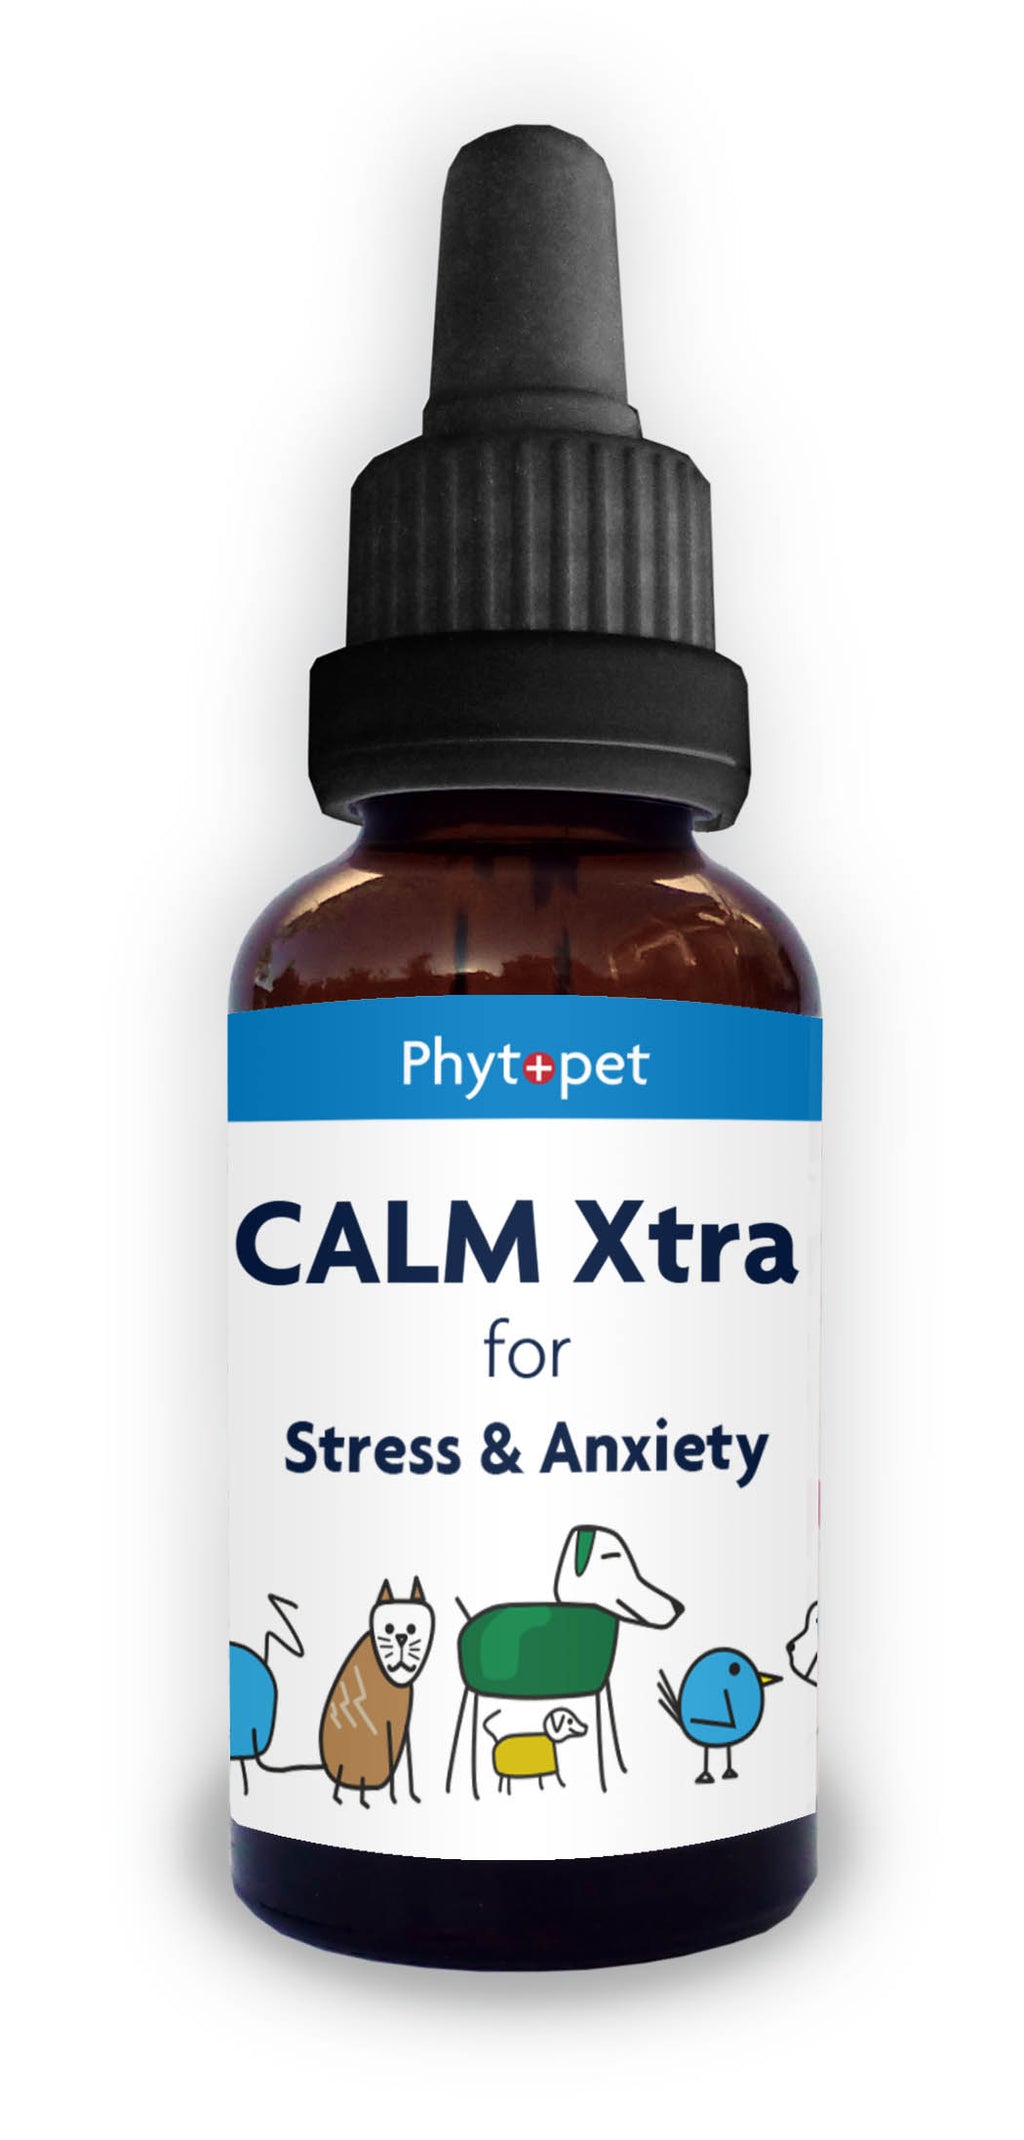 Calm Xtra - Herbal Aid for Stress, Anxiety, and Hyperactivity